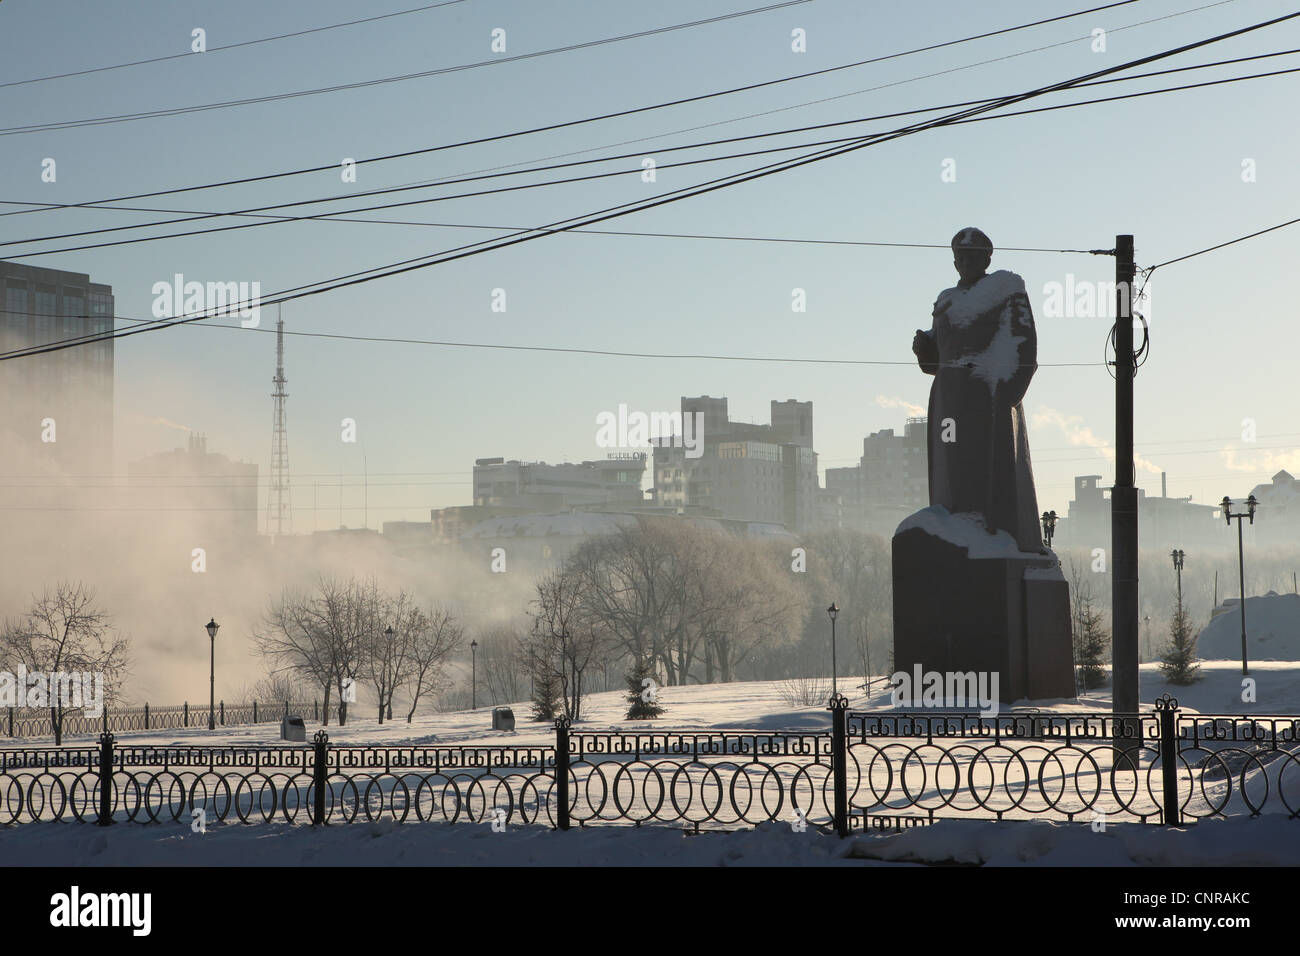 Monument to Russian revolutionary Ivan Malyshev on the embankment of the Iset River in Yekaterinburg, Russia. Stock Photo